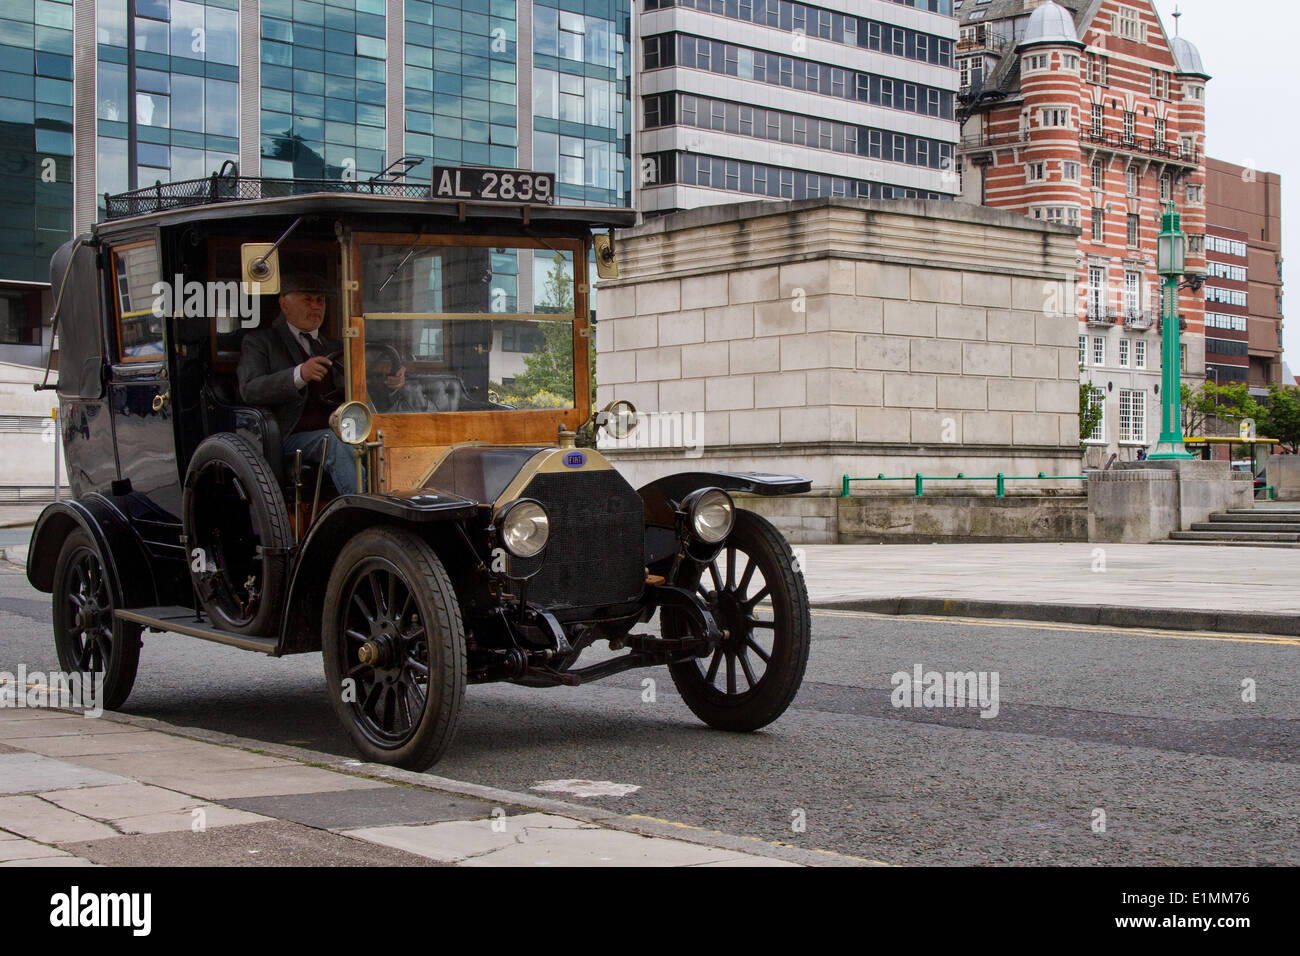 1912 pre-war vintage Taxi Fiat 1590cc petrol car used by the BBC filming new Series for BBC1 drama 'Our Zoo' - based on the story of Chester Zoo which will be told in a new BBC1 family drama. Stock Photo